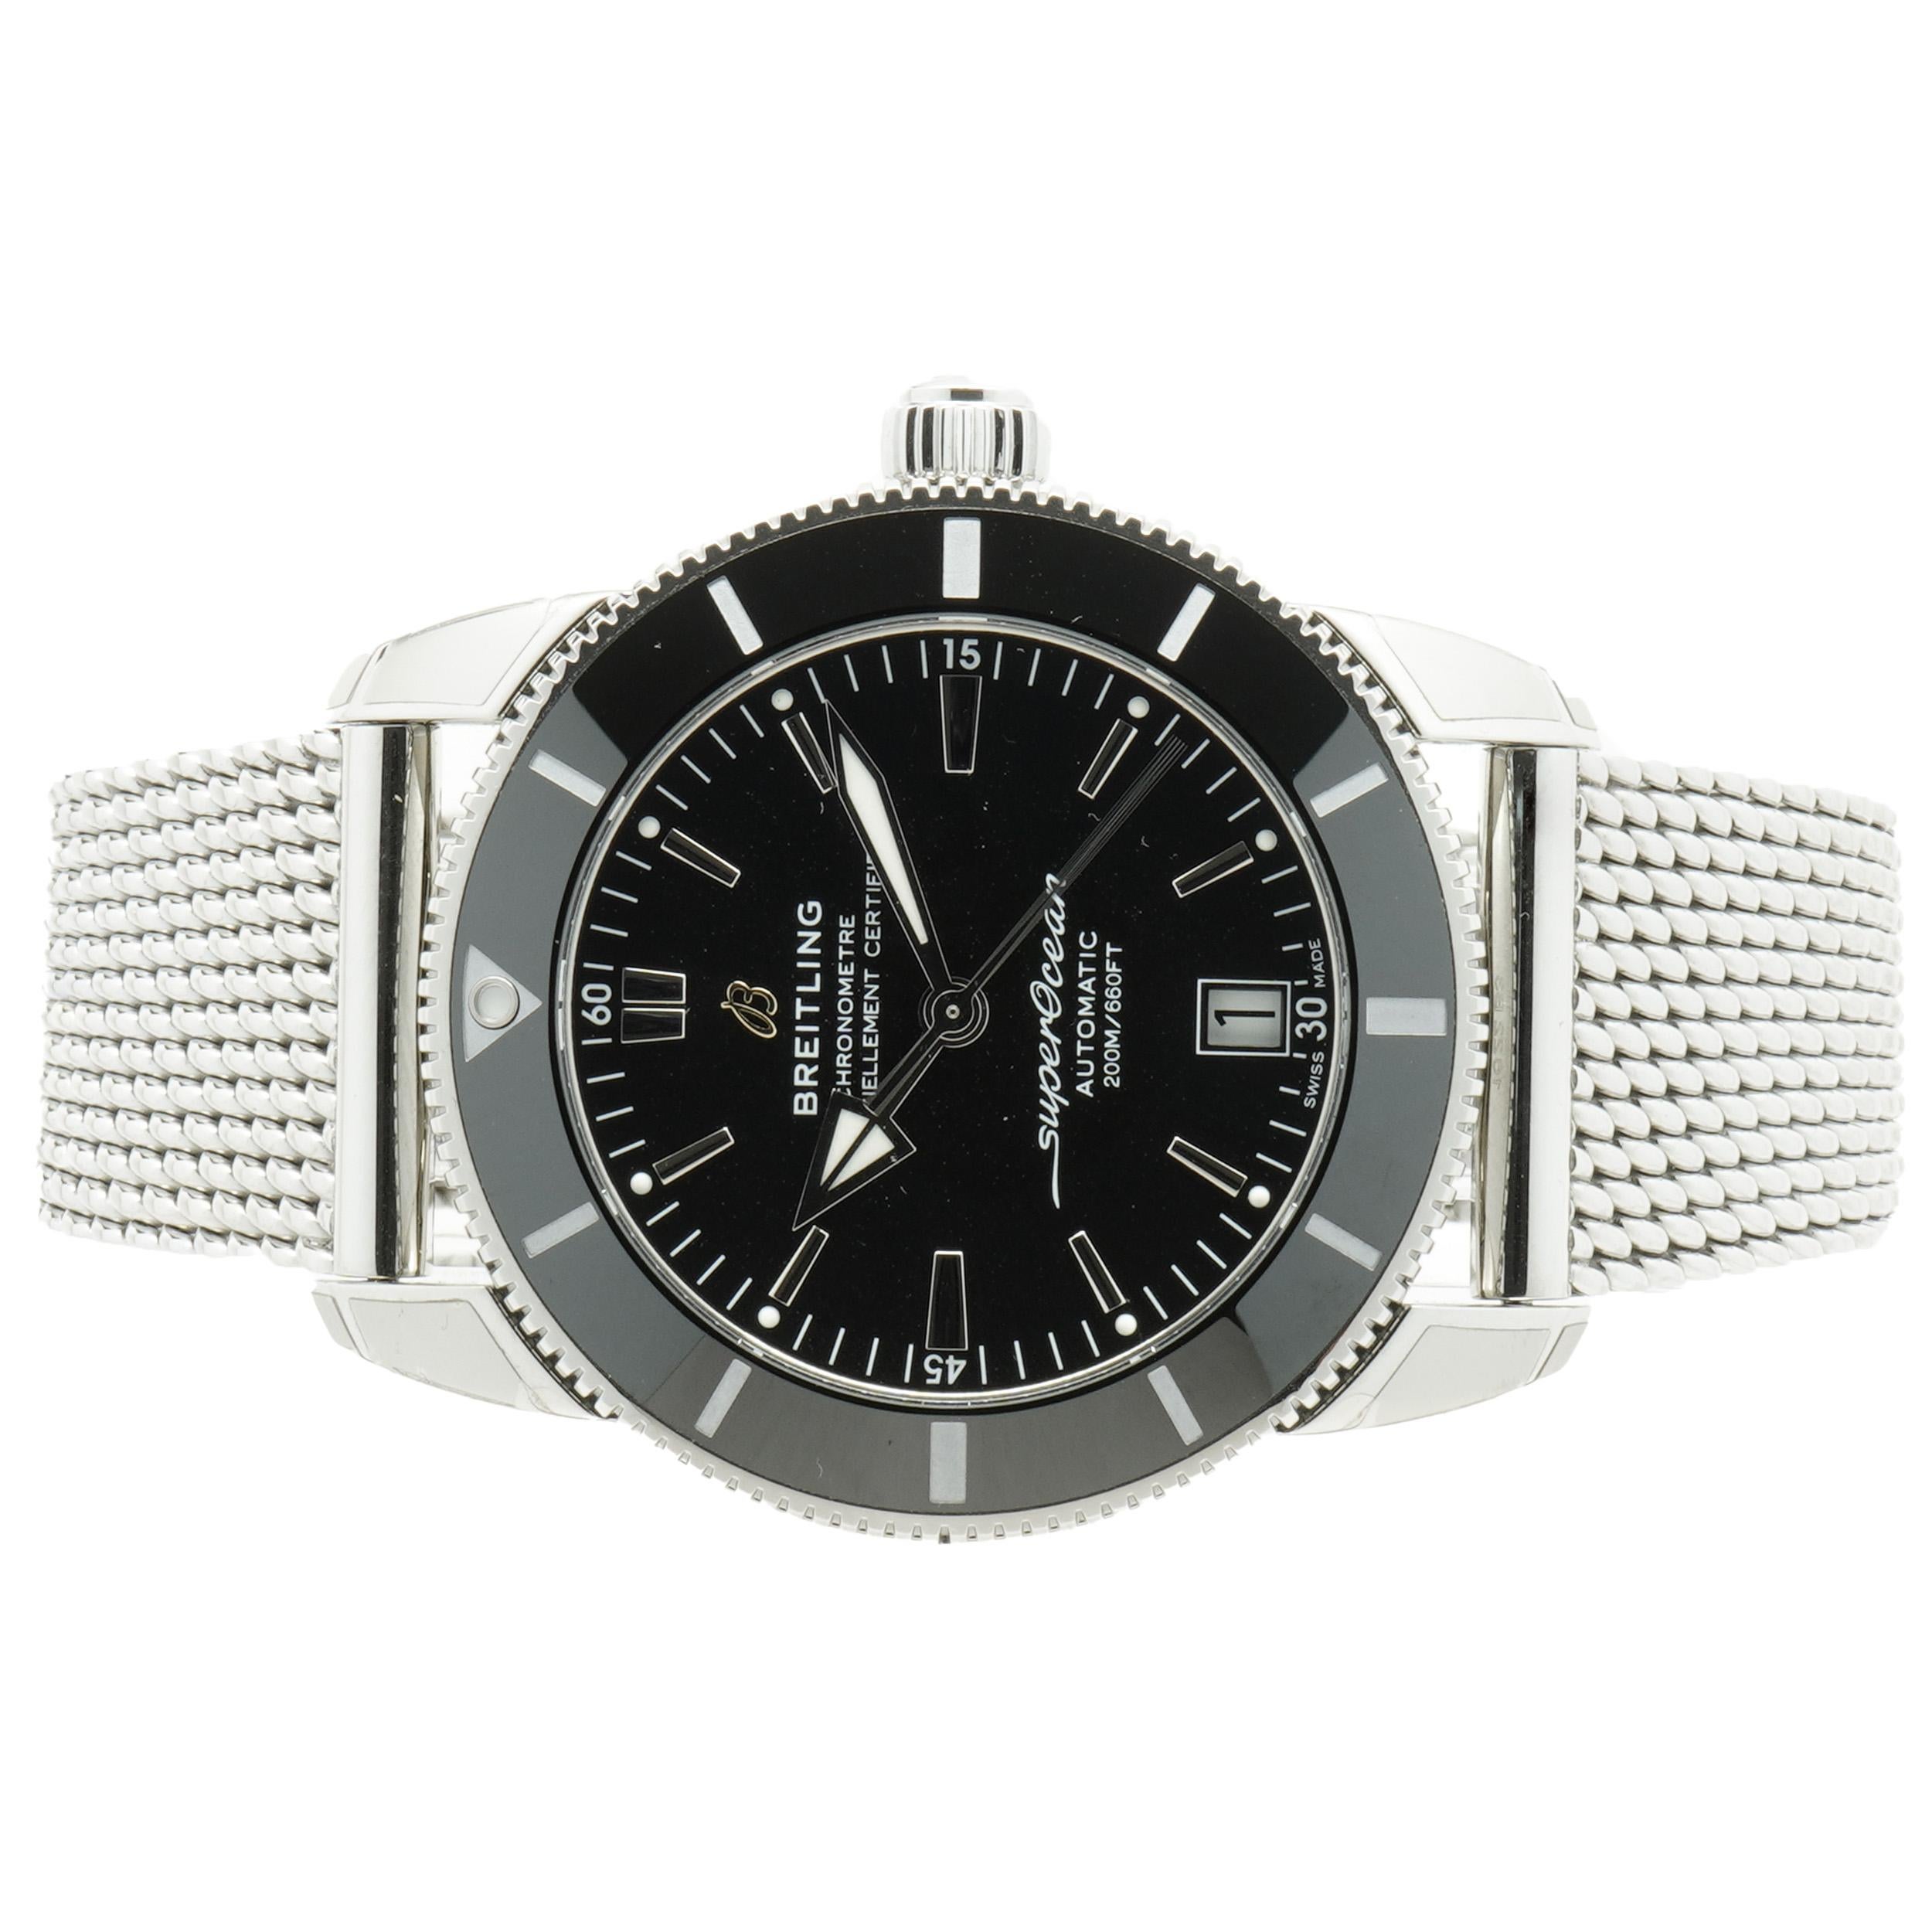 Designer: Breitling
Movement: automatic
Function: hours, minutes, subseconds, date, 
Case: 42mm stainless steel with black ceramic insert
Dial: black stick	
Band: stainless steel mesh band
Reference: AB2010
Serial #: 5125XXX

Complete with original